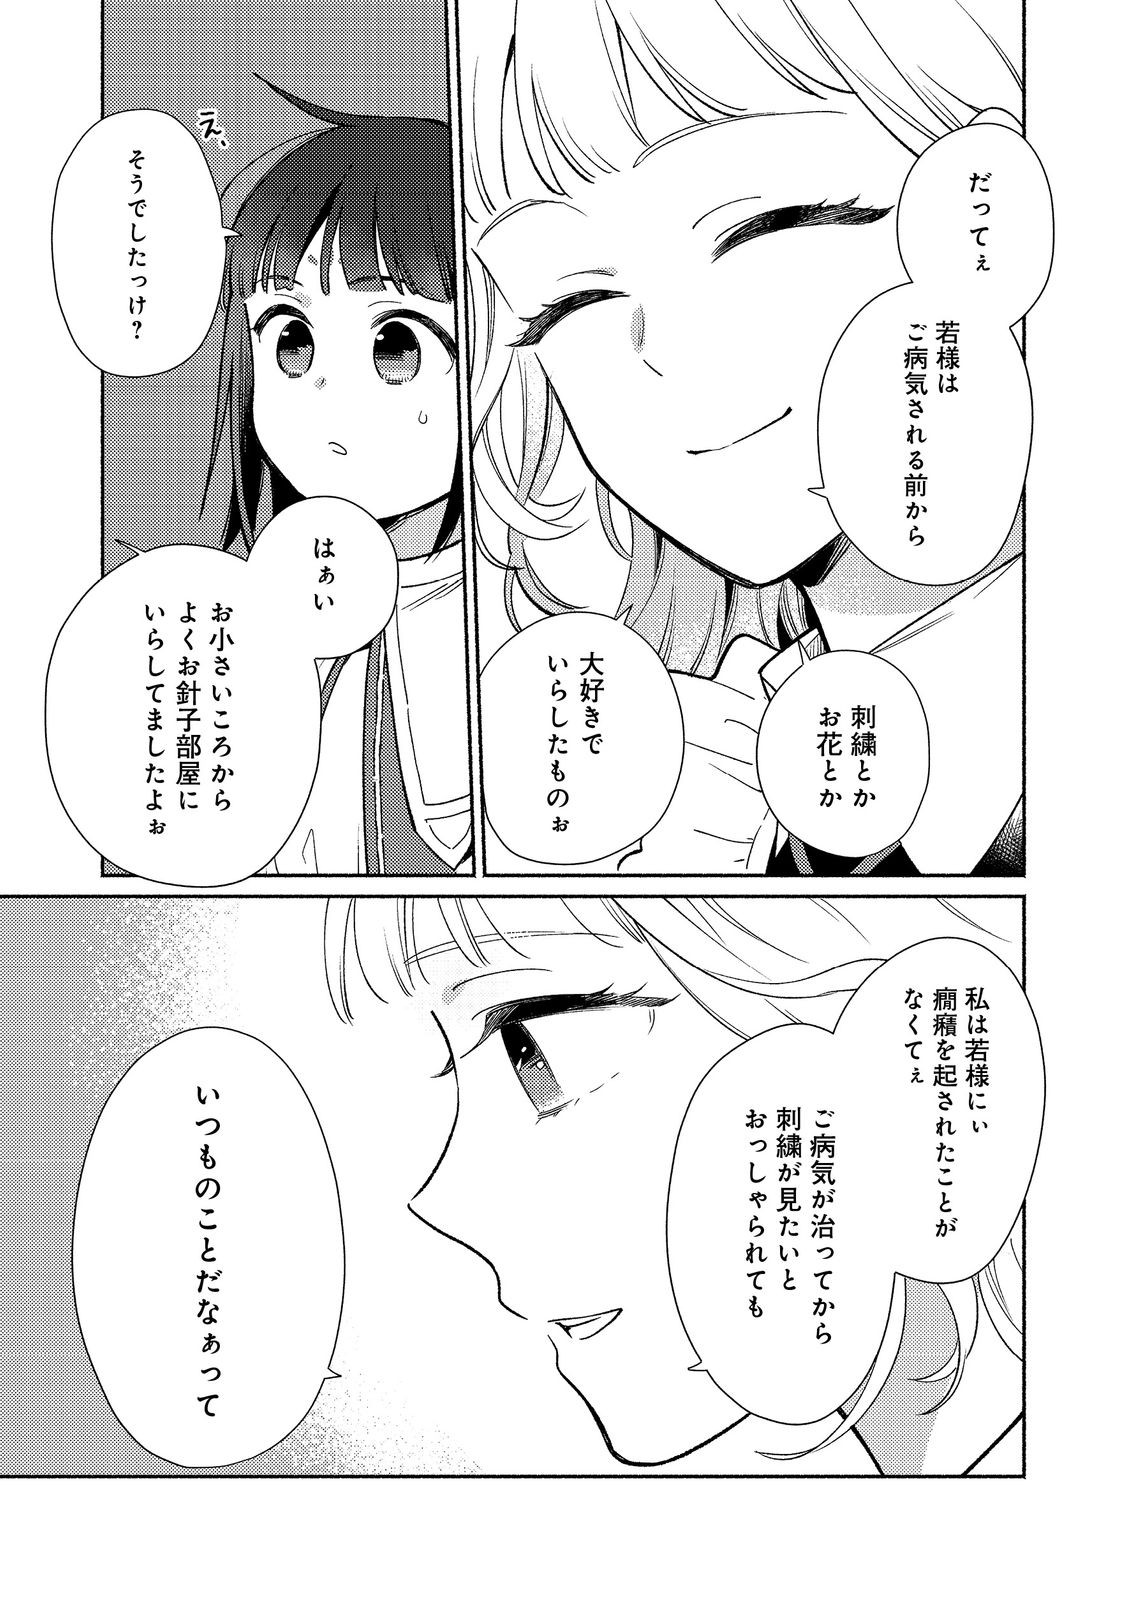 I’m the White Pig Nobleman 第21.2話 - Page 7